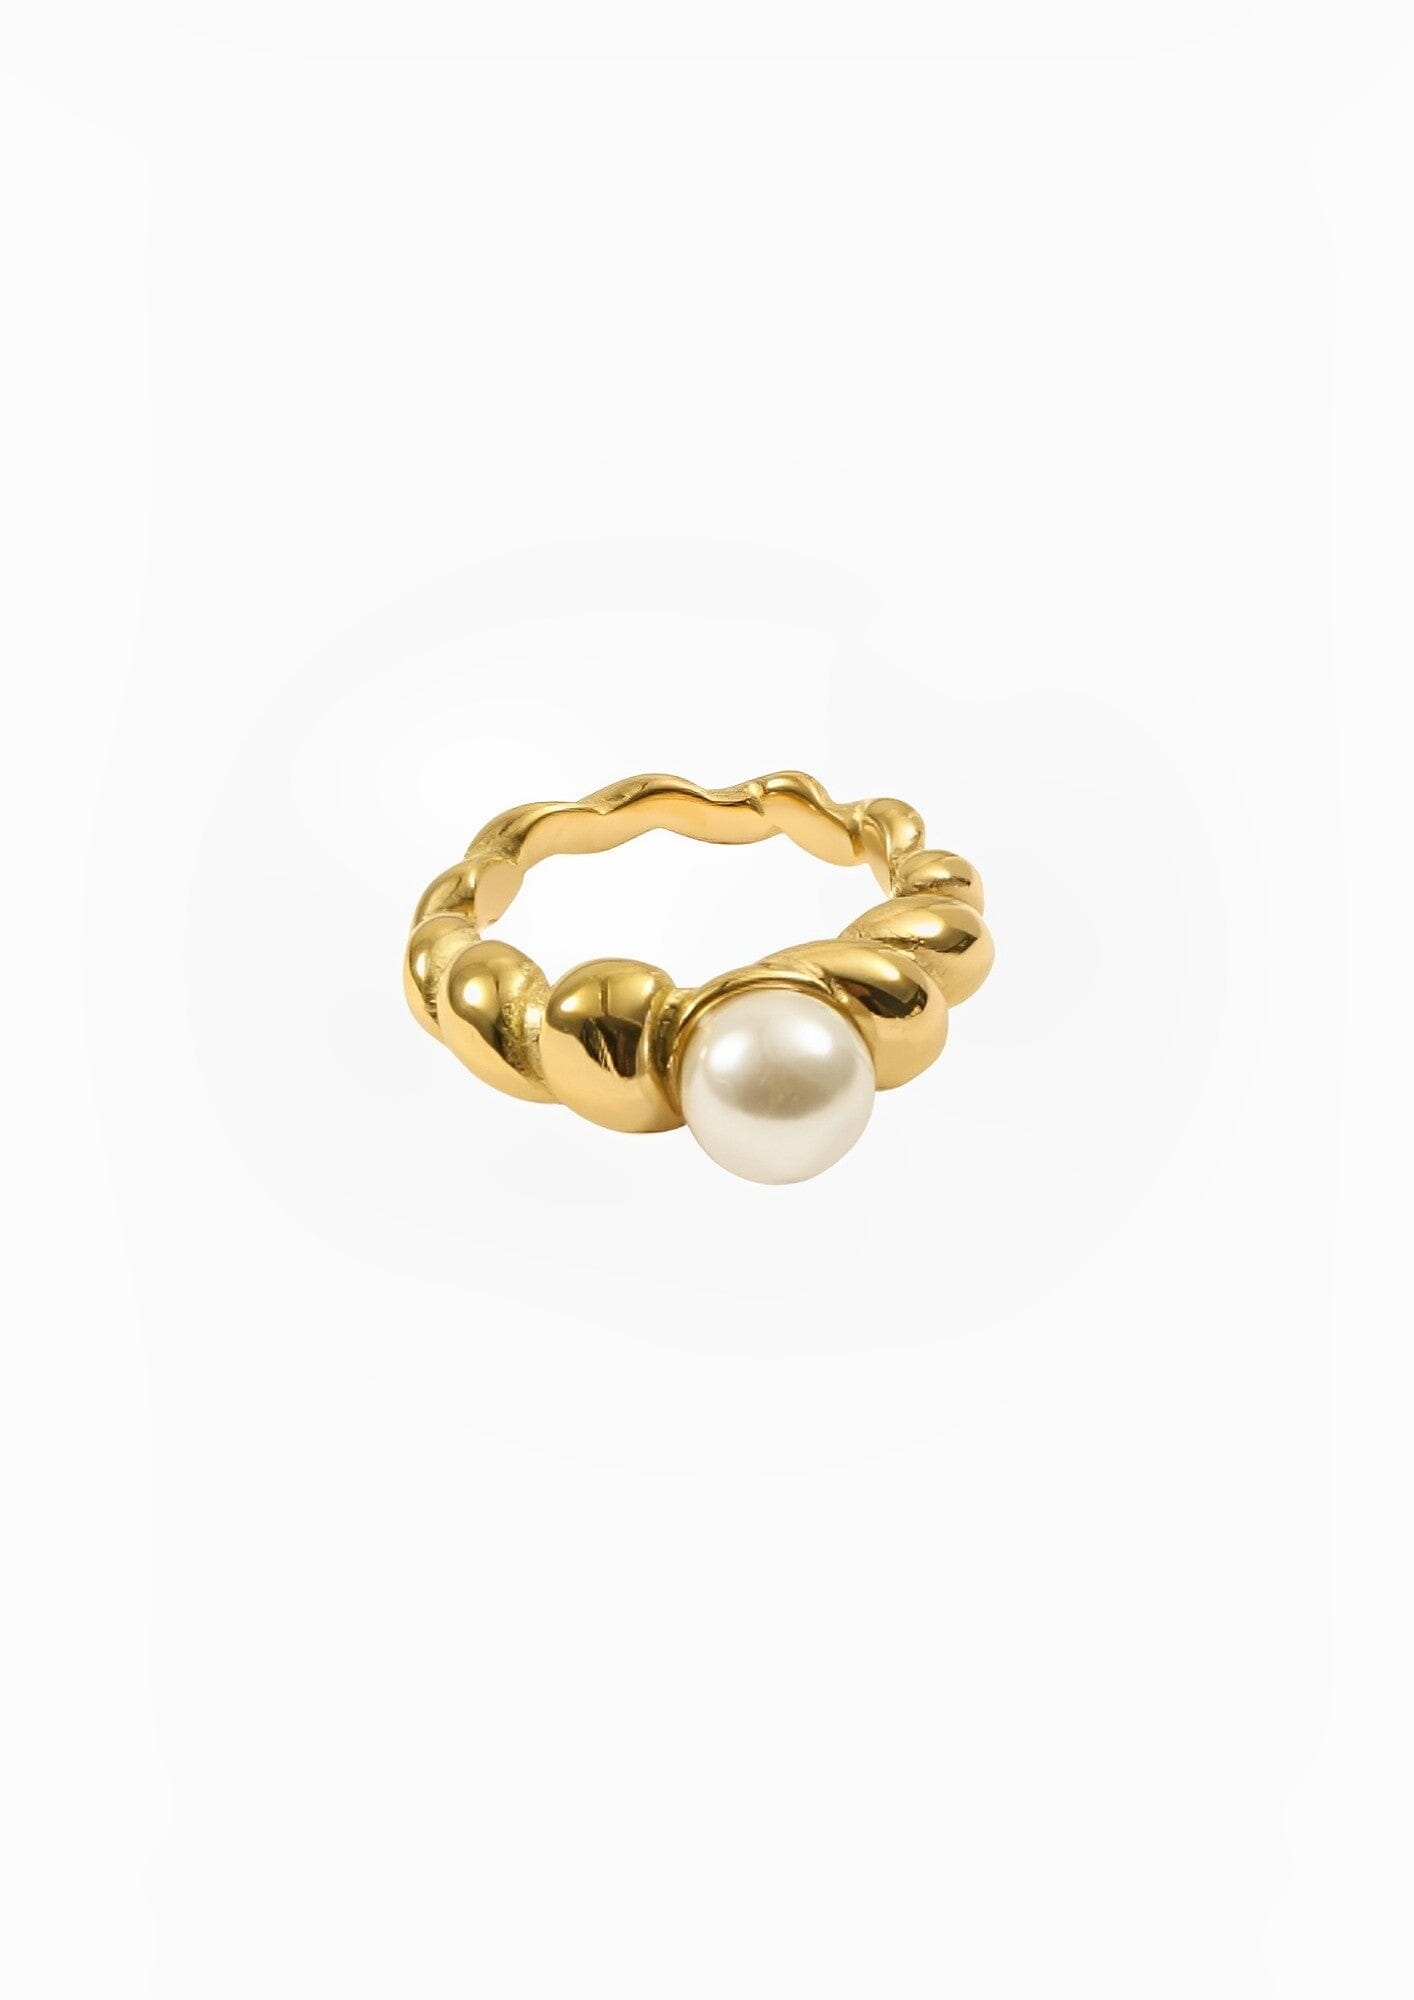 CROISSANT PEARL RING earing Yubama Jewelry Online Store - The Elegant Designs of Gold and Silver ! 